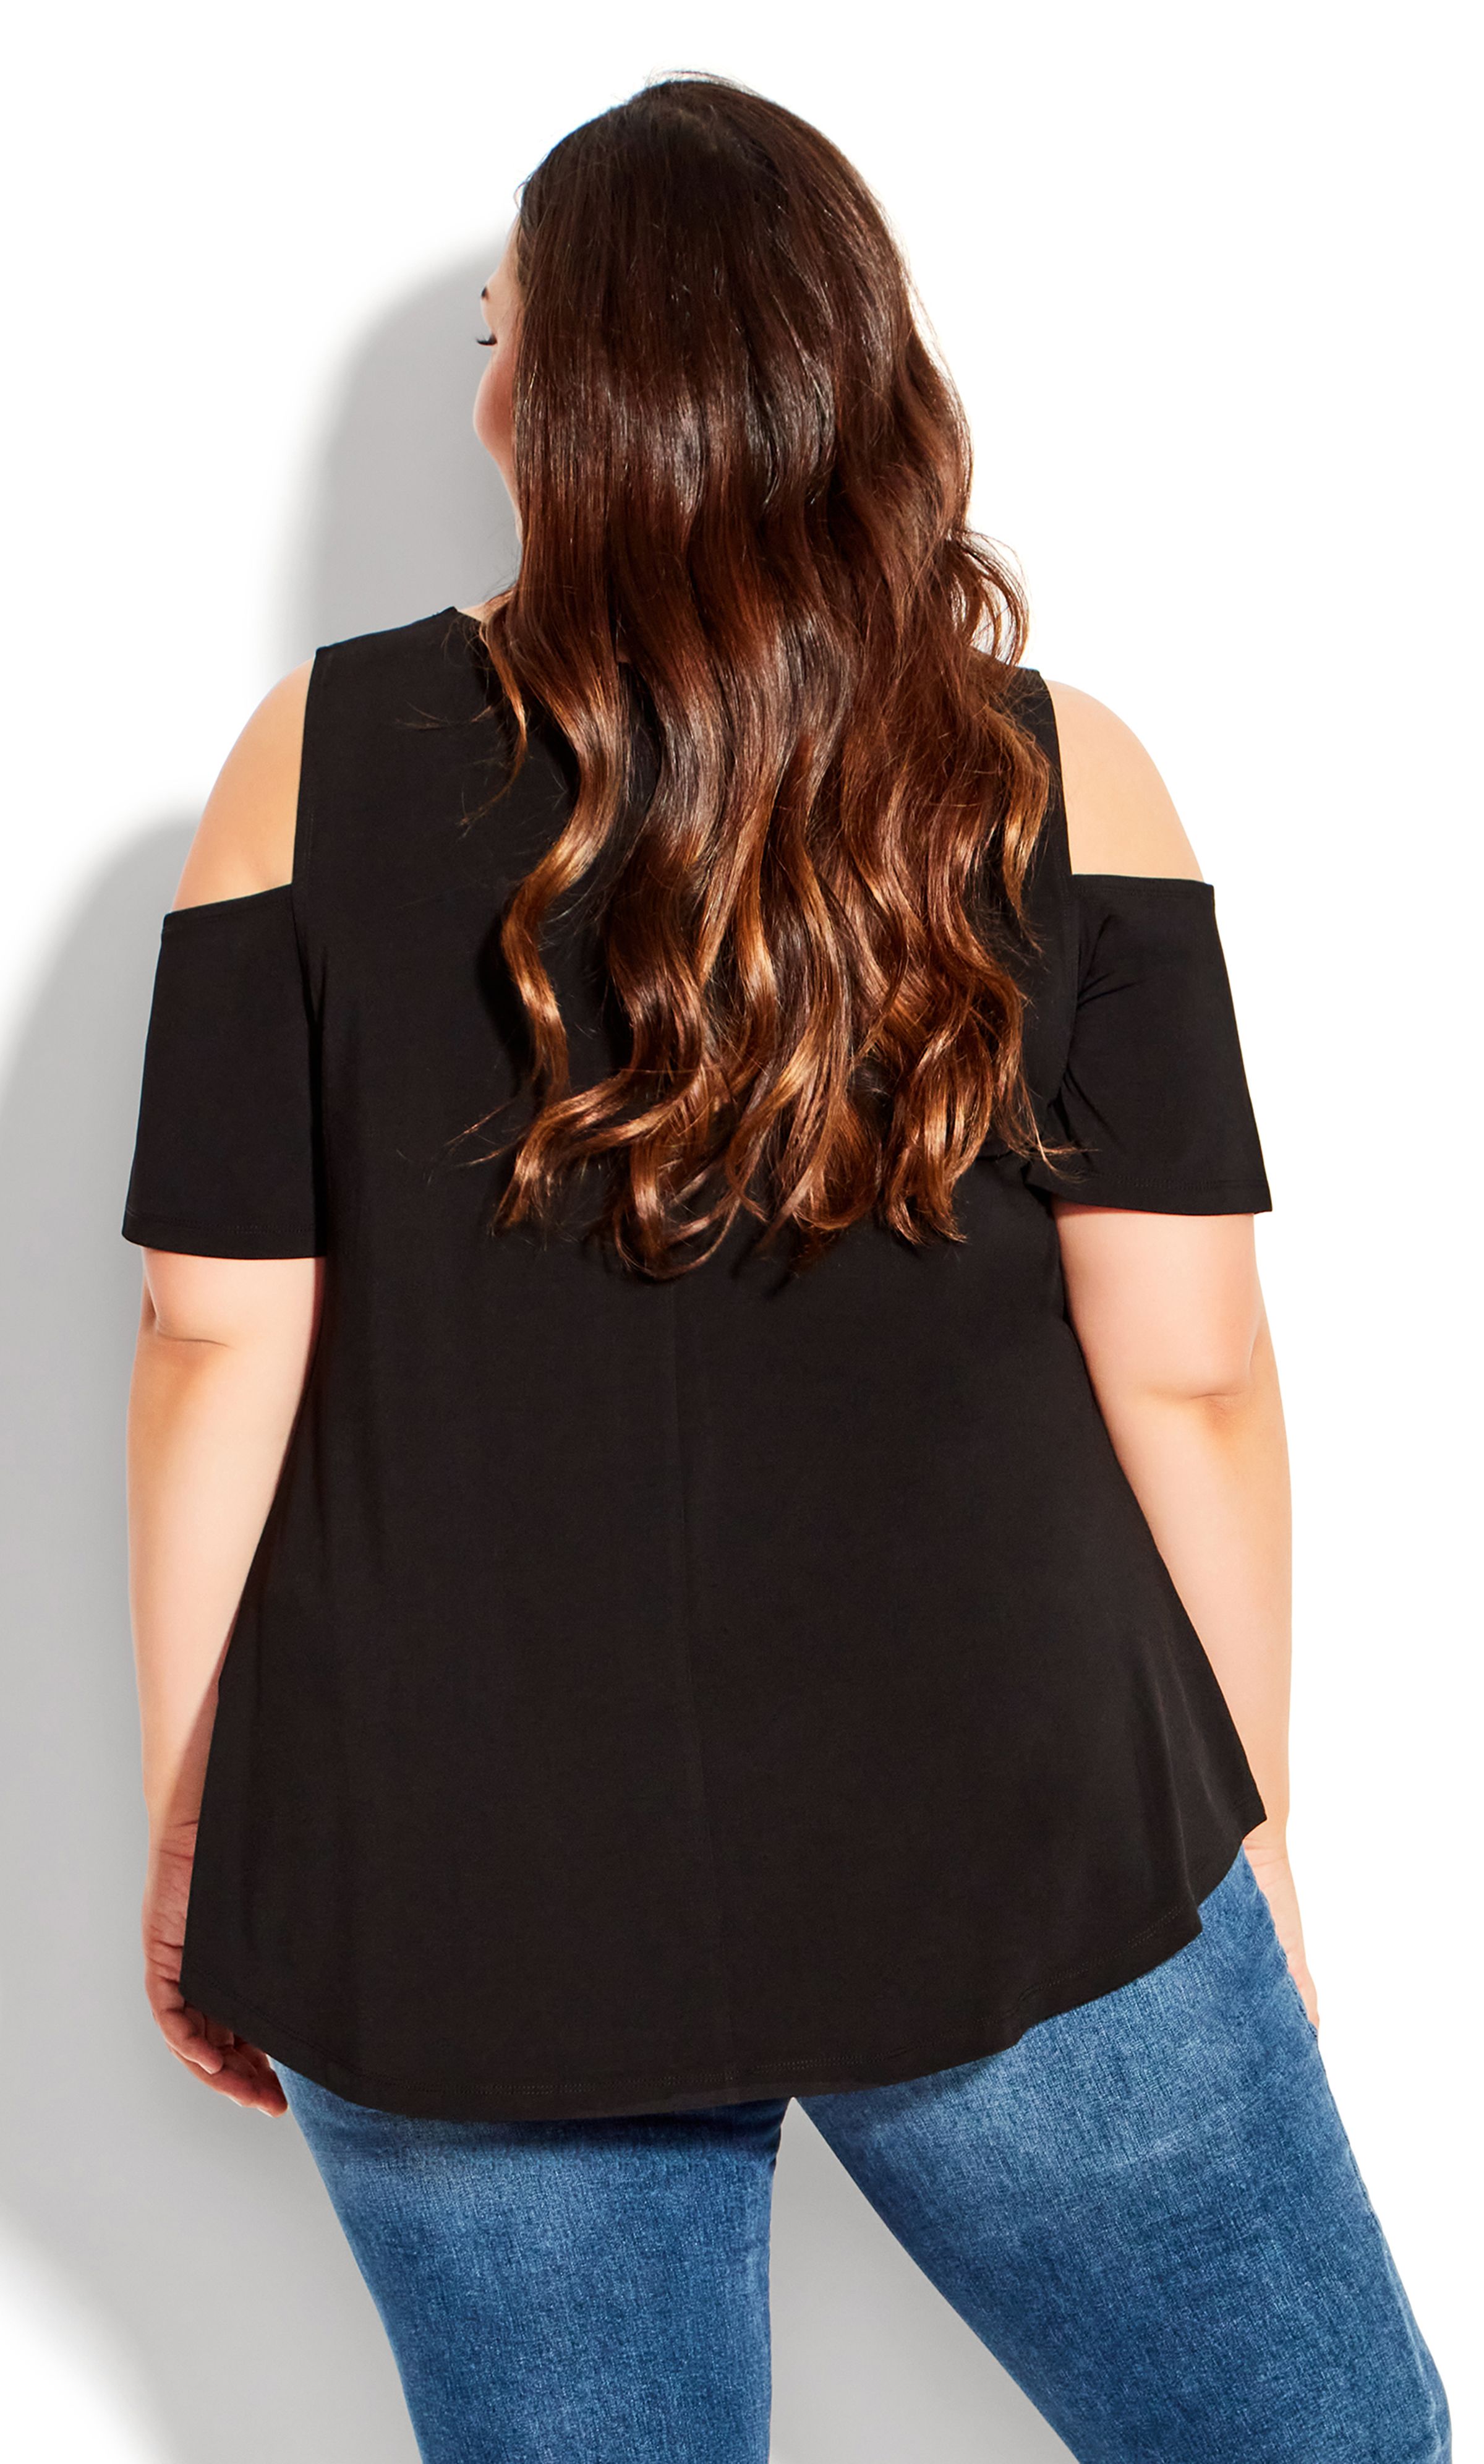 No matter where you're going, you'll be dressed to perfection in the Cold Shoulder Plain Top. This relaxed style adds a playful touch with a glimpse of shoulder and a soft stretch fabrication. A versatile black design, this top is ideal to dress up or down. Key Features Include: - Scoop neckline - Short cold shoulder sleeves - Pullover style - Darted bust for shape - Relaxed fit - Stretch fabrication - Hip length hi-lo hemline Dress up this classic top with a black skirt and a longline statement necklace.